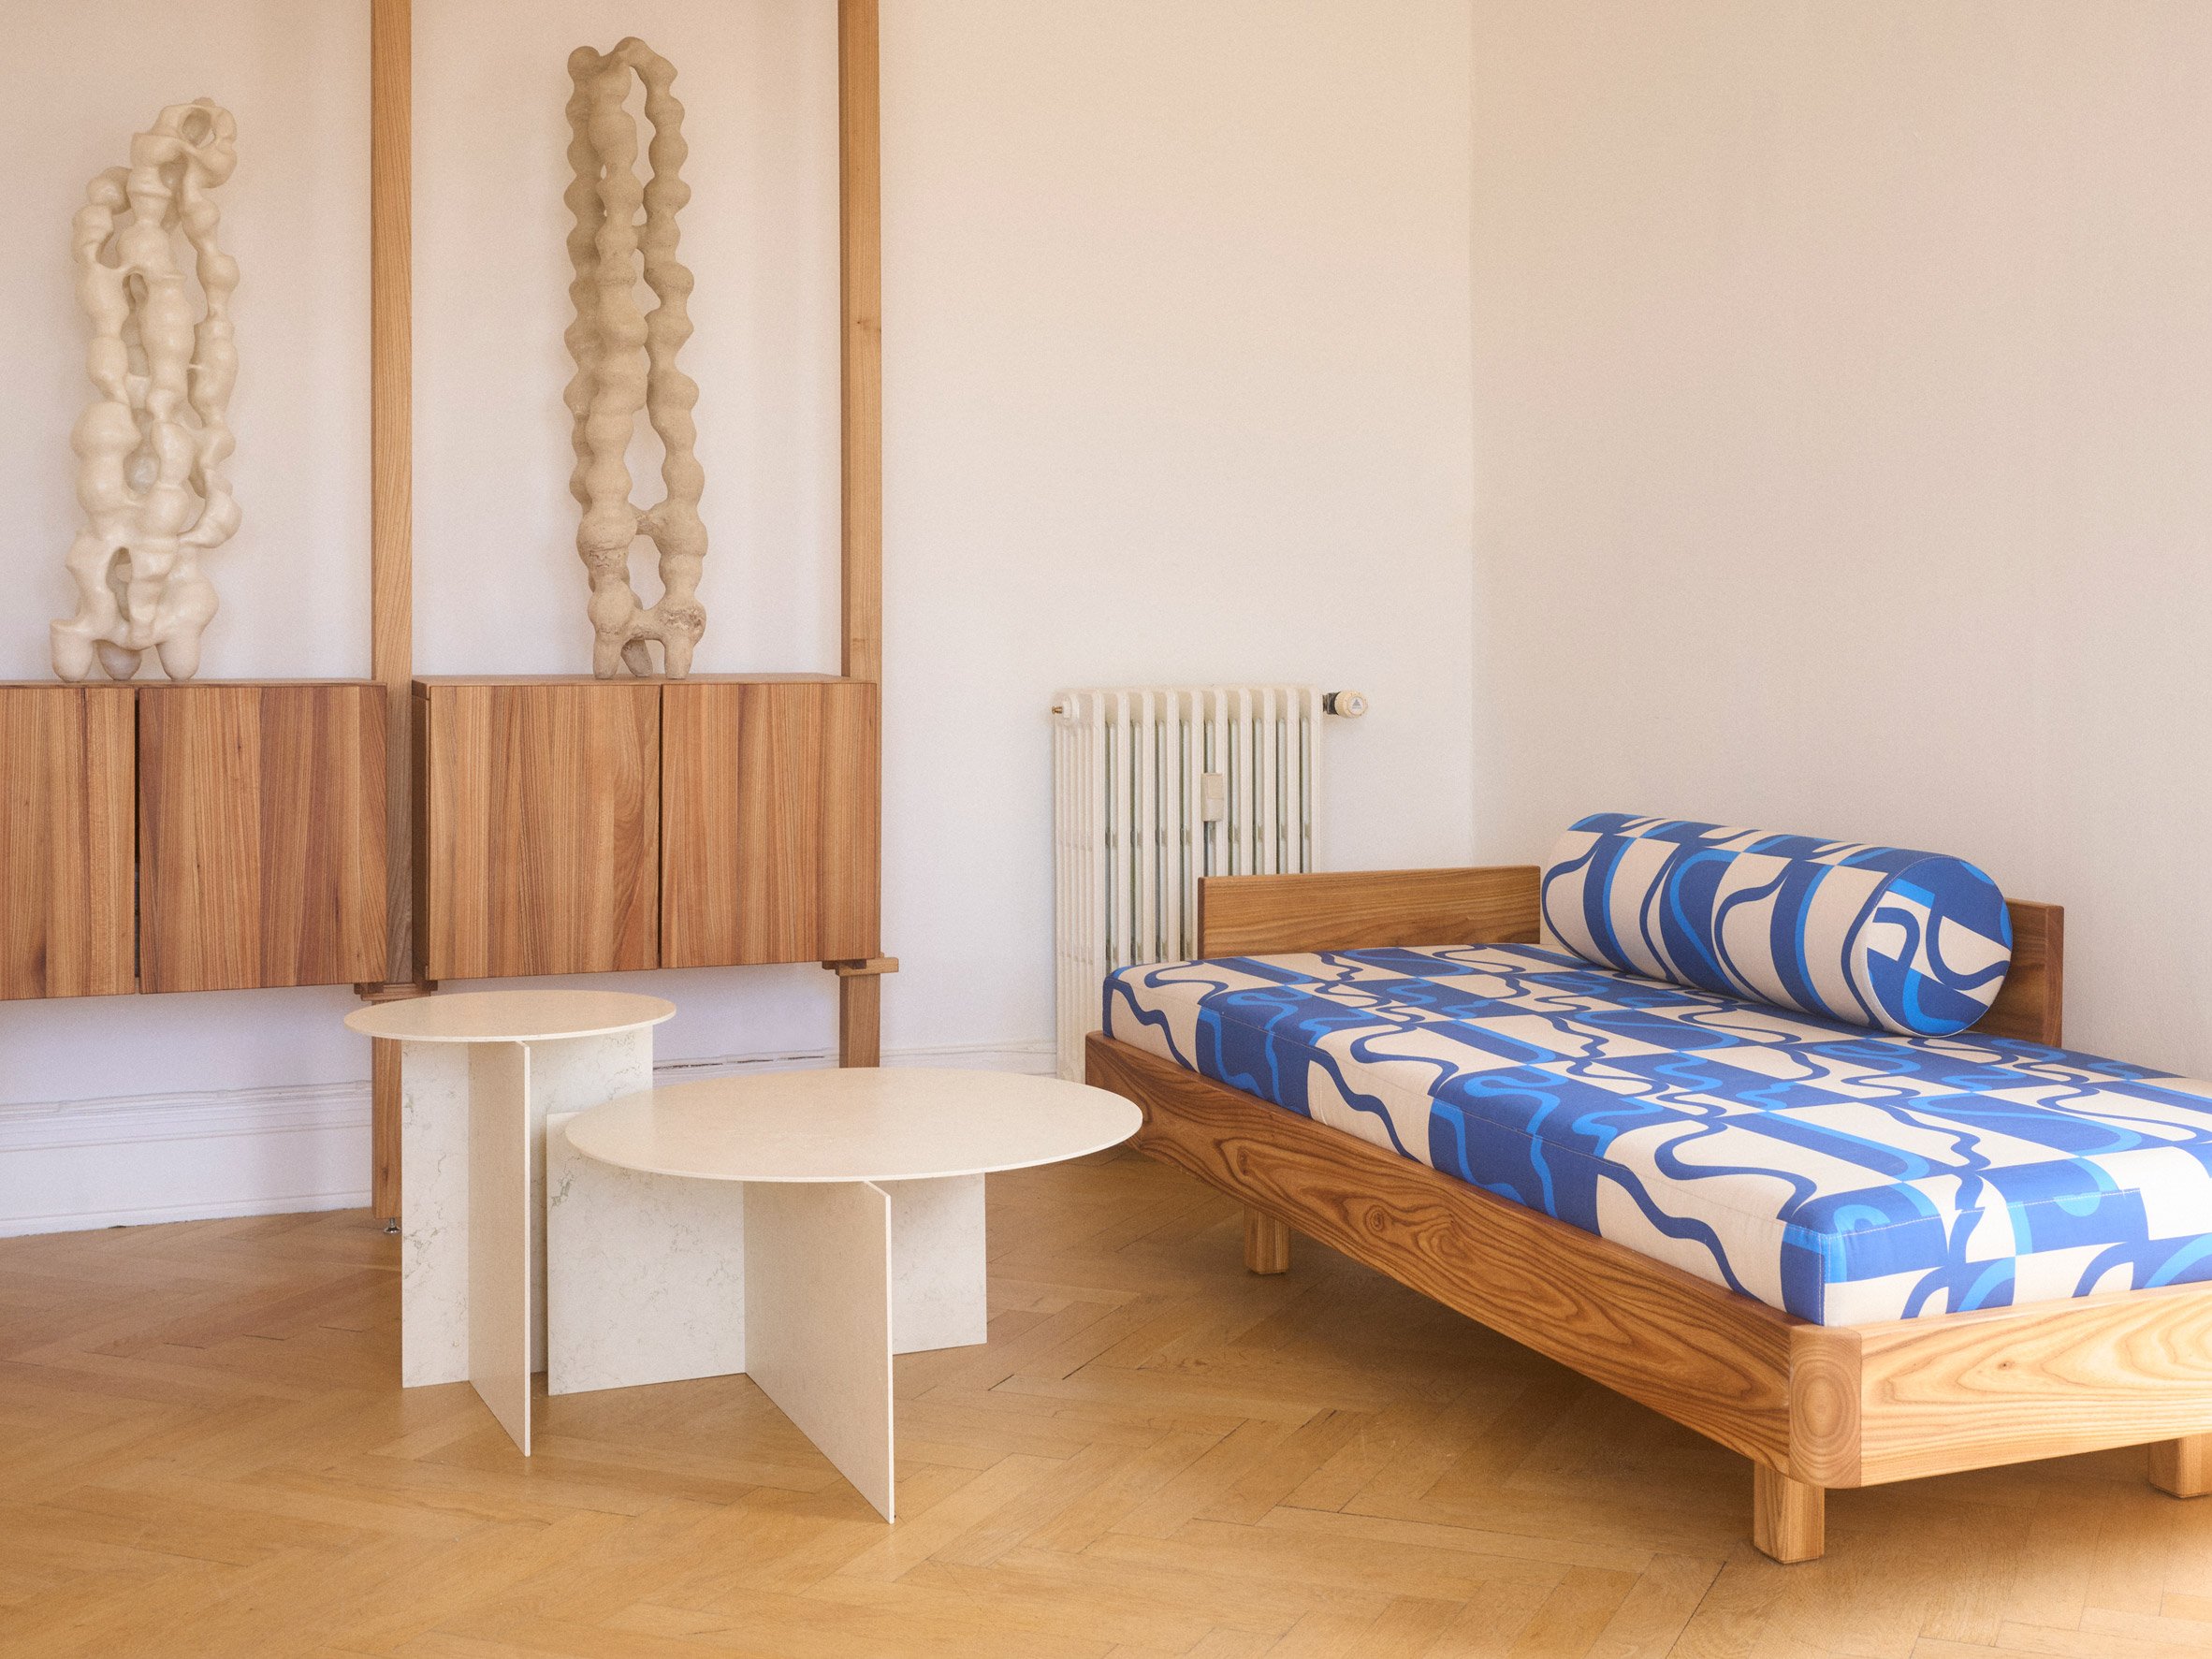 Bed by A Seat in Siena at NoDe exhibition by House of Nordic Design